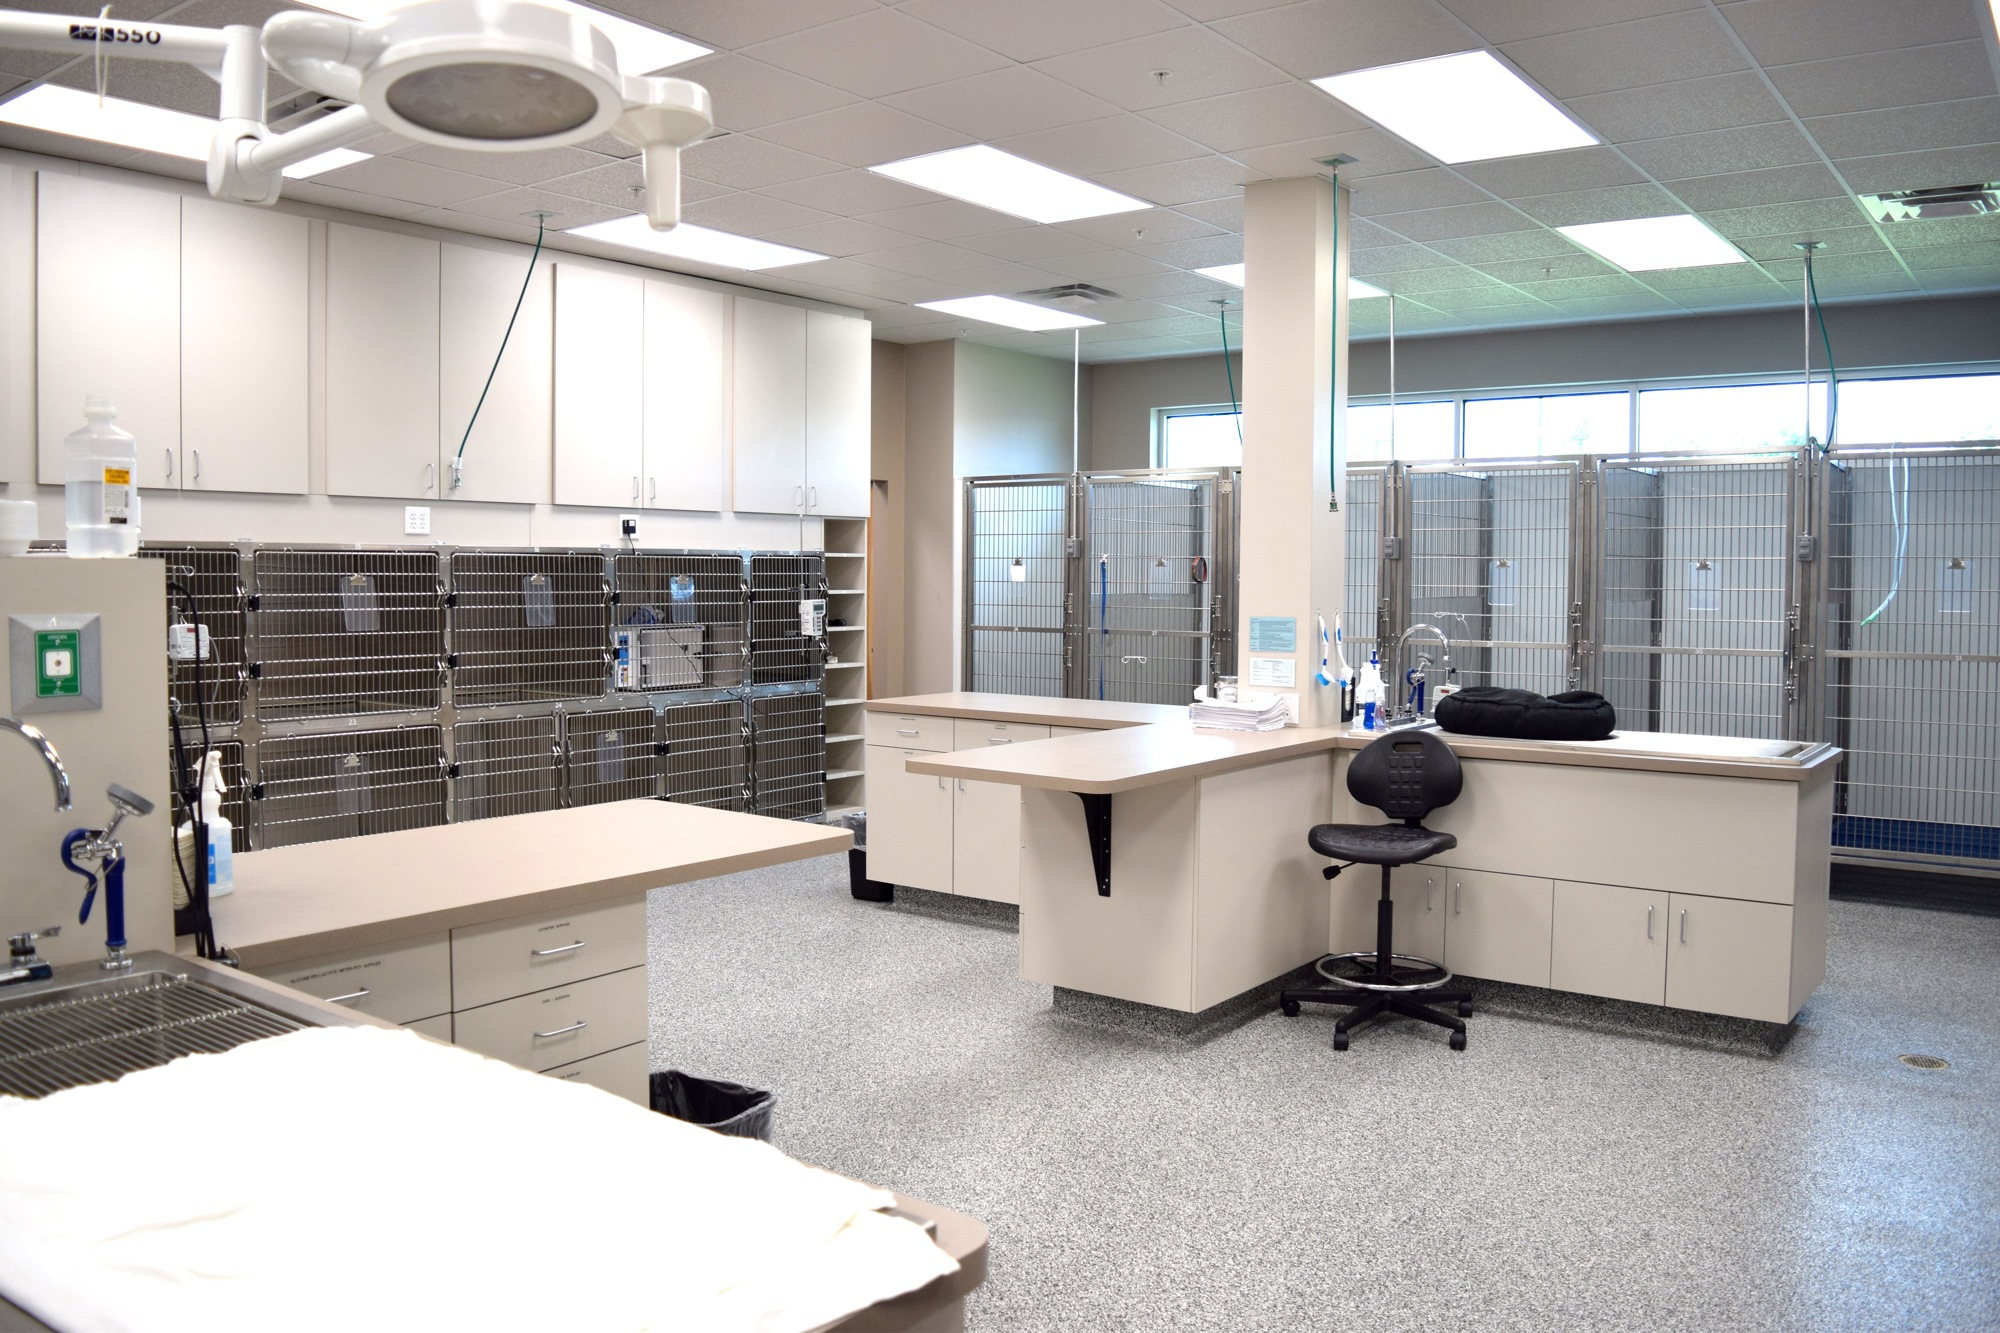 VEC’s Oakland location is fully equipped with lab equipment, X-ray capabilities, oxygen, anesthesia and more.